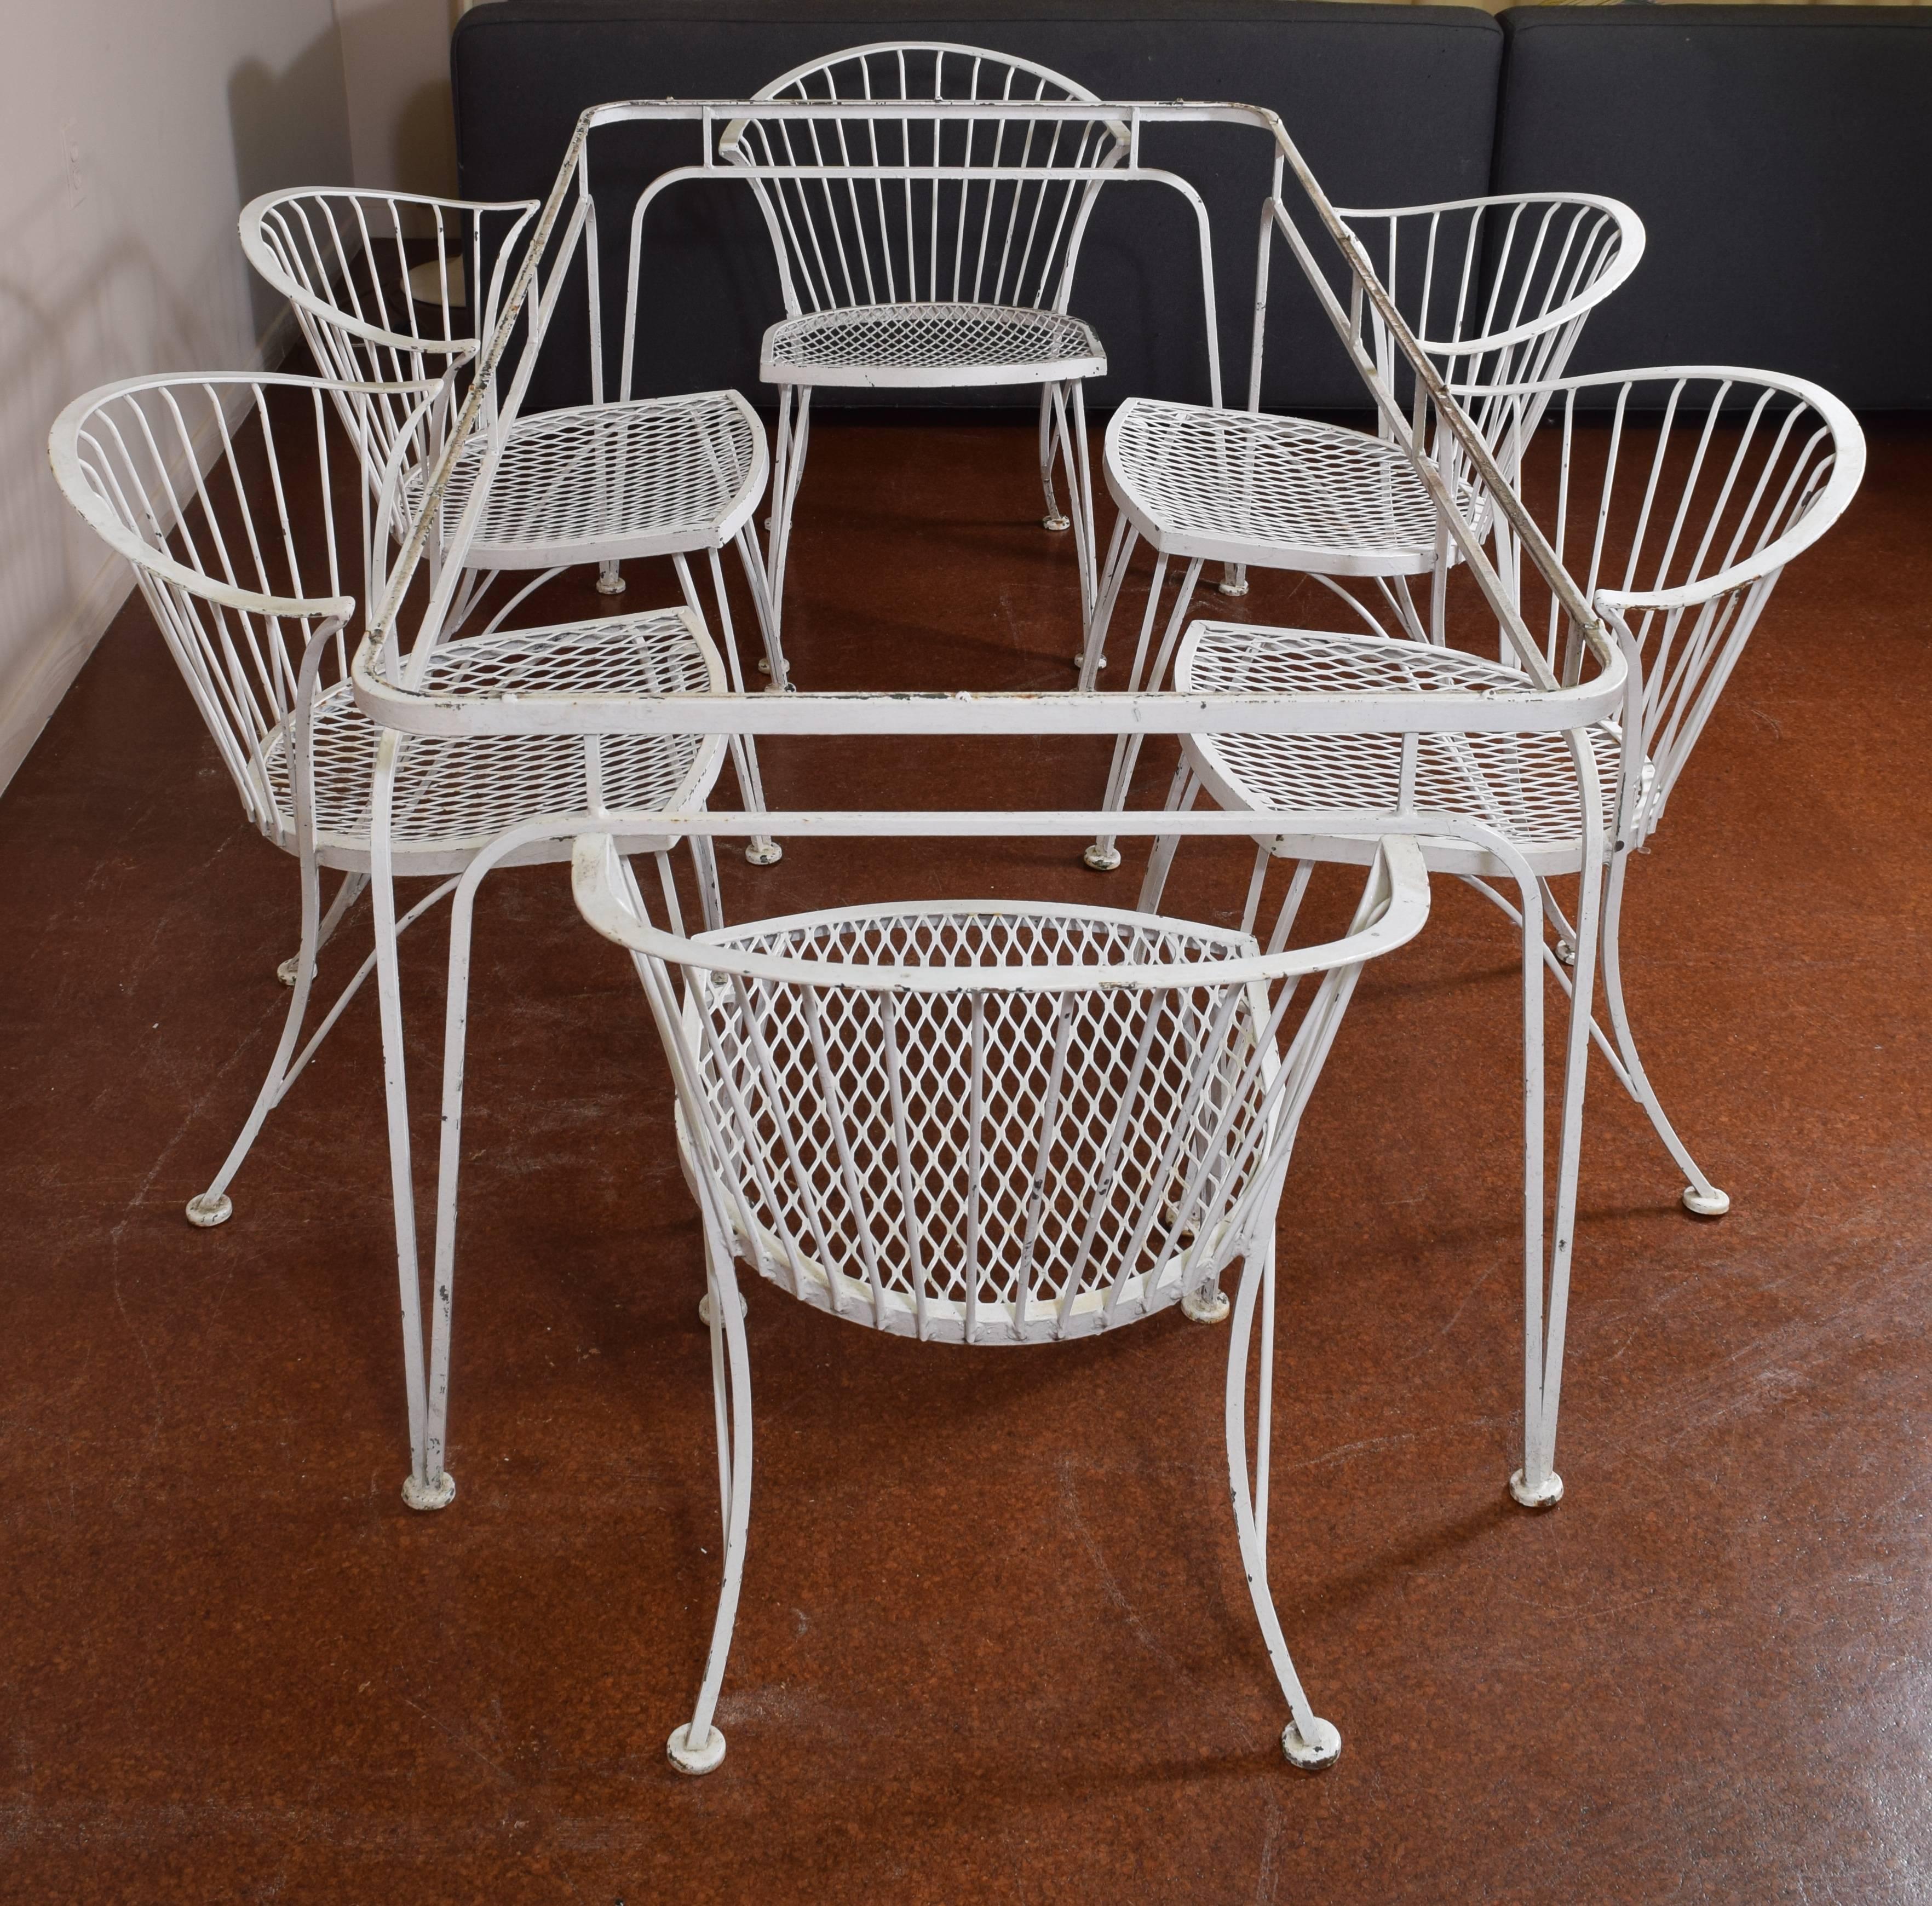 Vintage patio set by Russell Woodard featuring crisp, modern silhouettes in painted wrought iron.

Also available in a black five-piece set with 4' table.